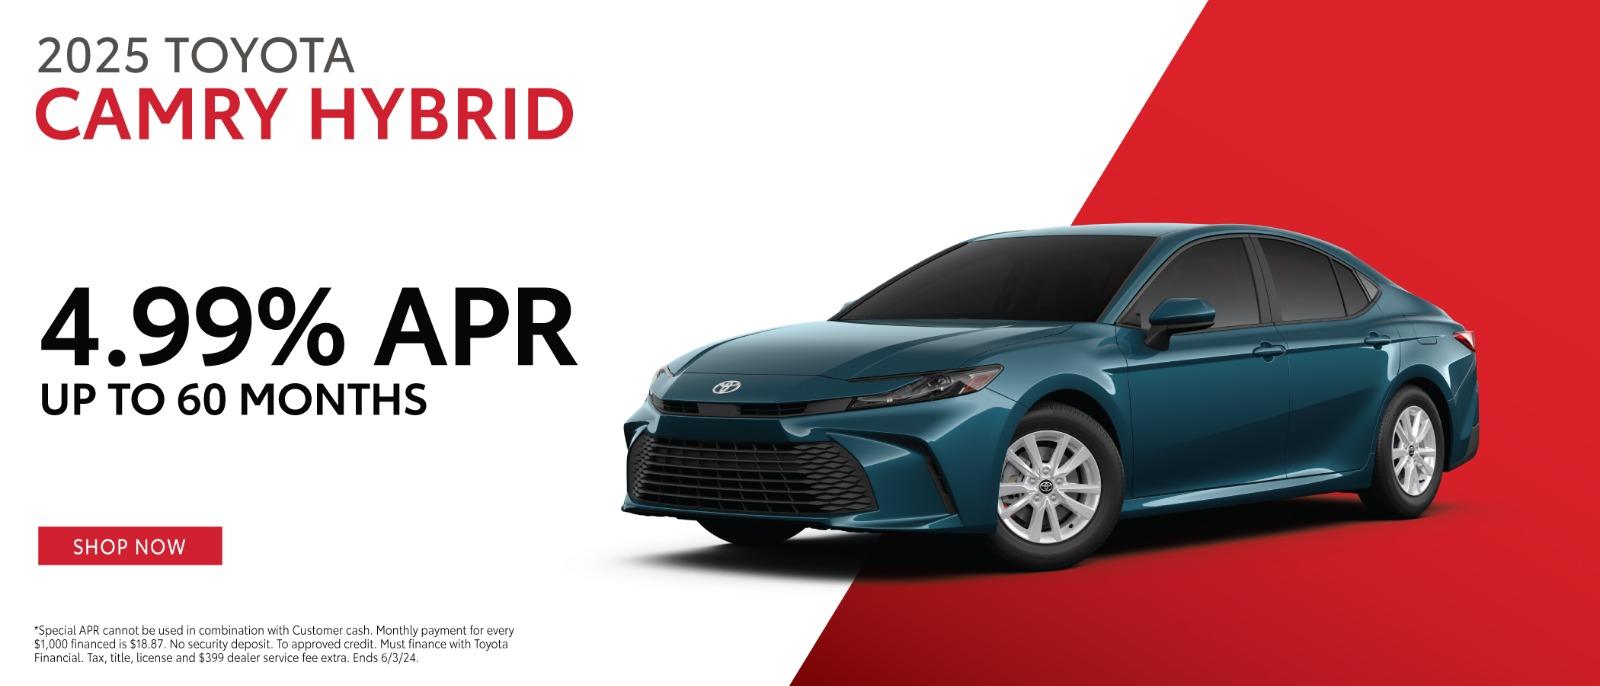 2024 Toyota Camry Hybrid| 4.99% APR up to 60Months